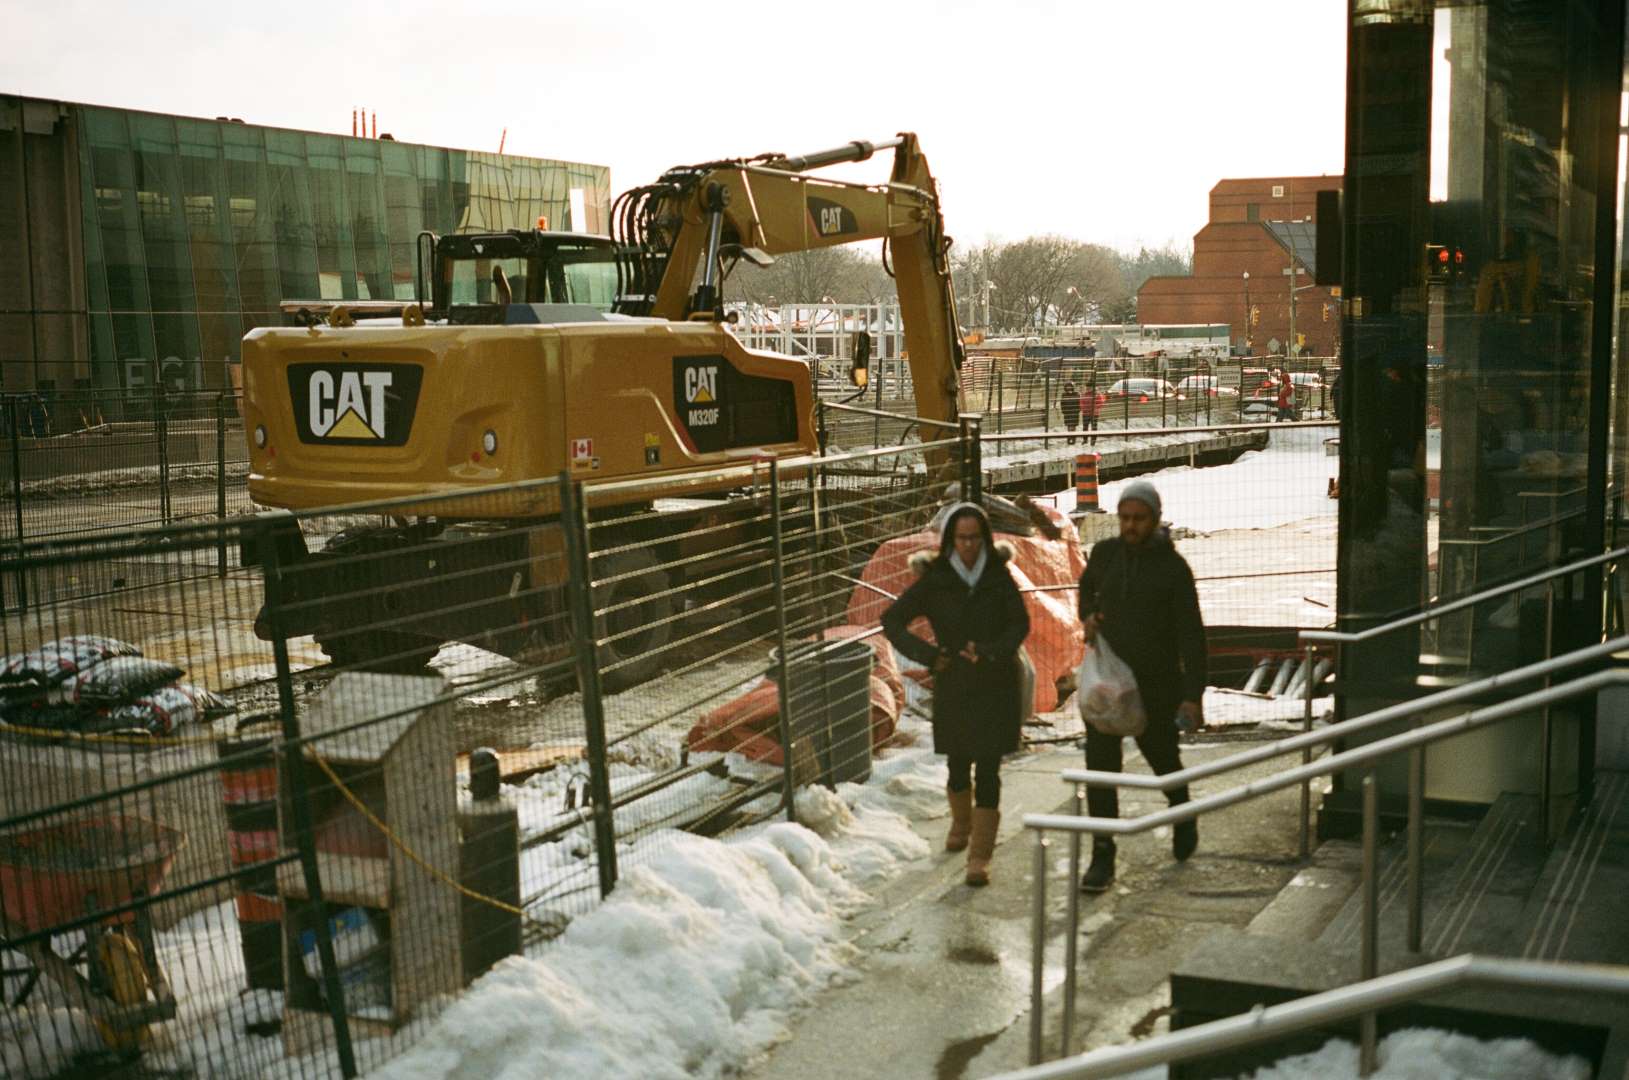 A colour photograph of two women walking next to a large earth excavator